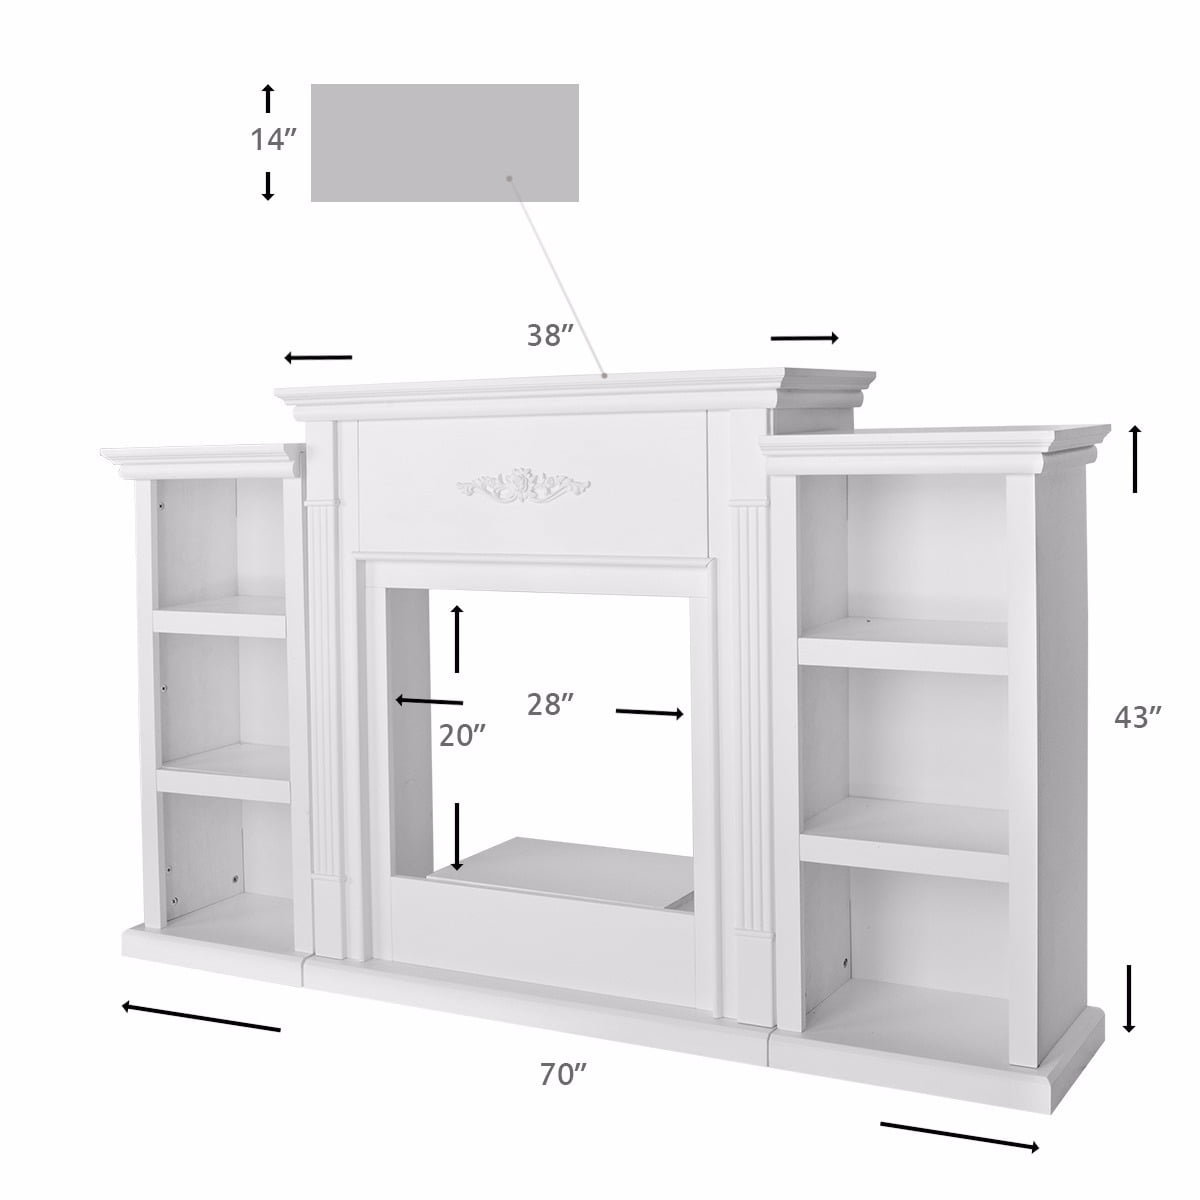 Barton 70 Media Tv Stand For Fireplace Bookcases Large Mantel